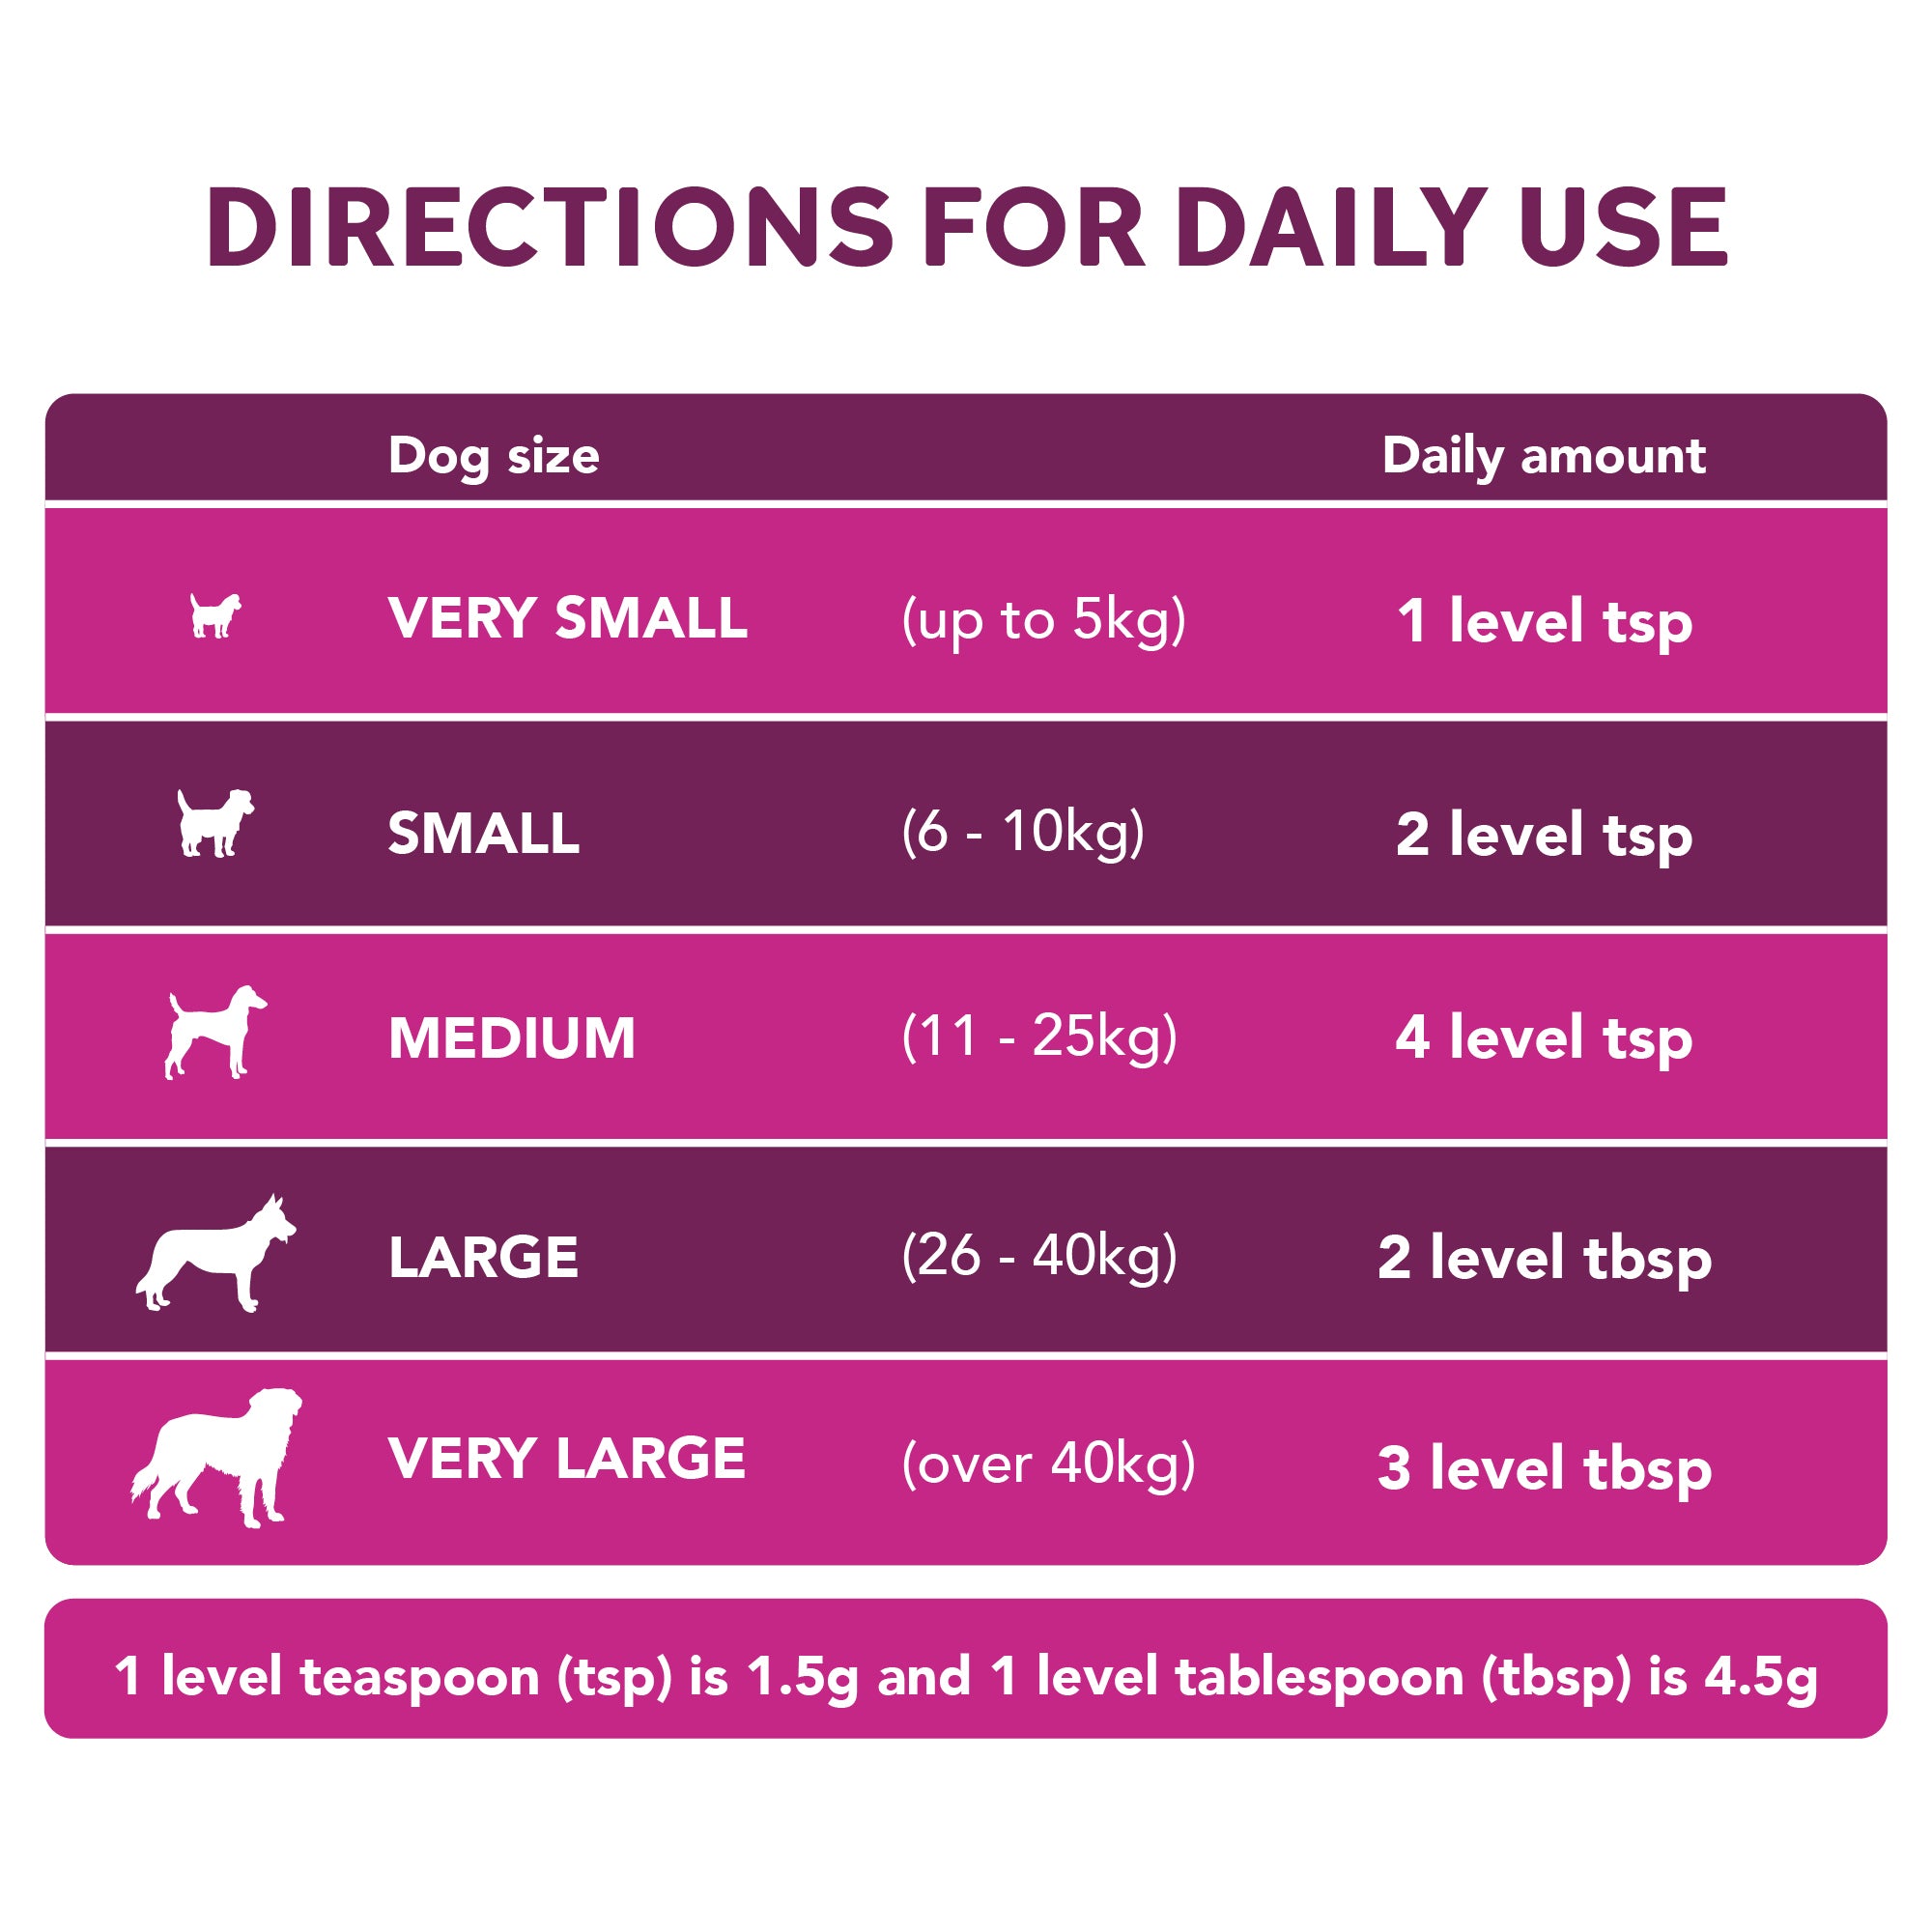 Digestive Care Probiotic & Fibre for Dogs